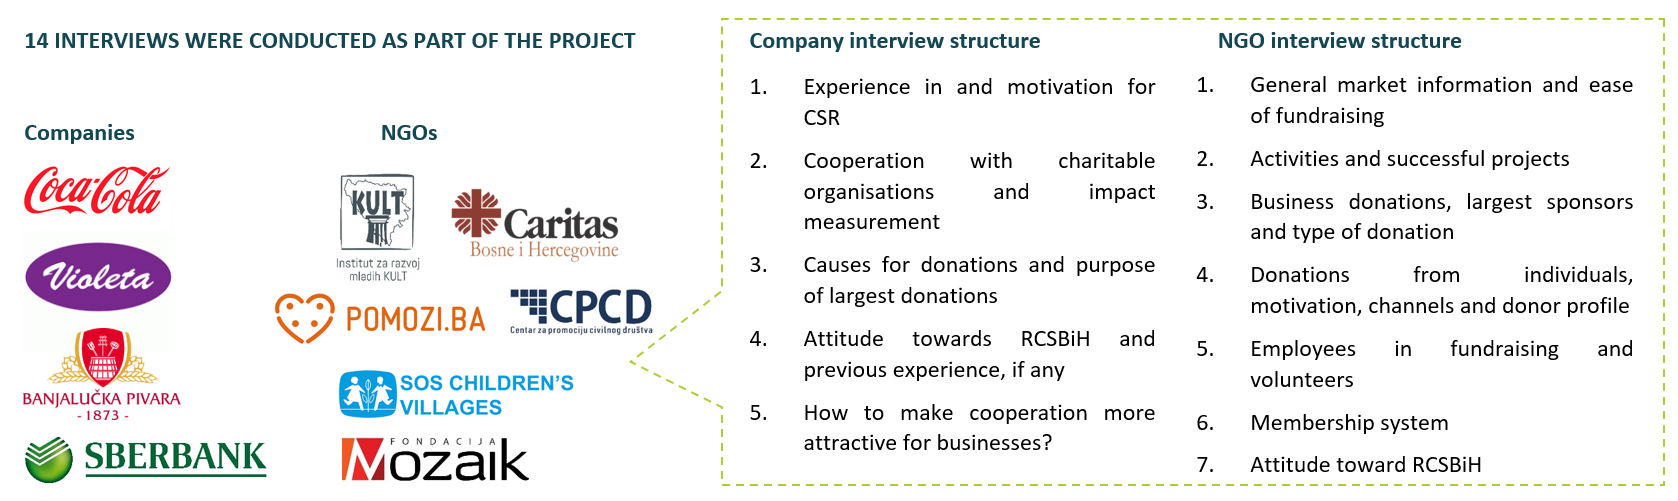 company and NGO interview structure